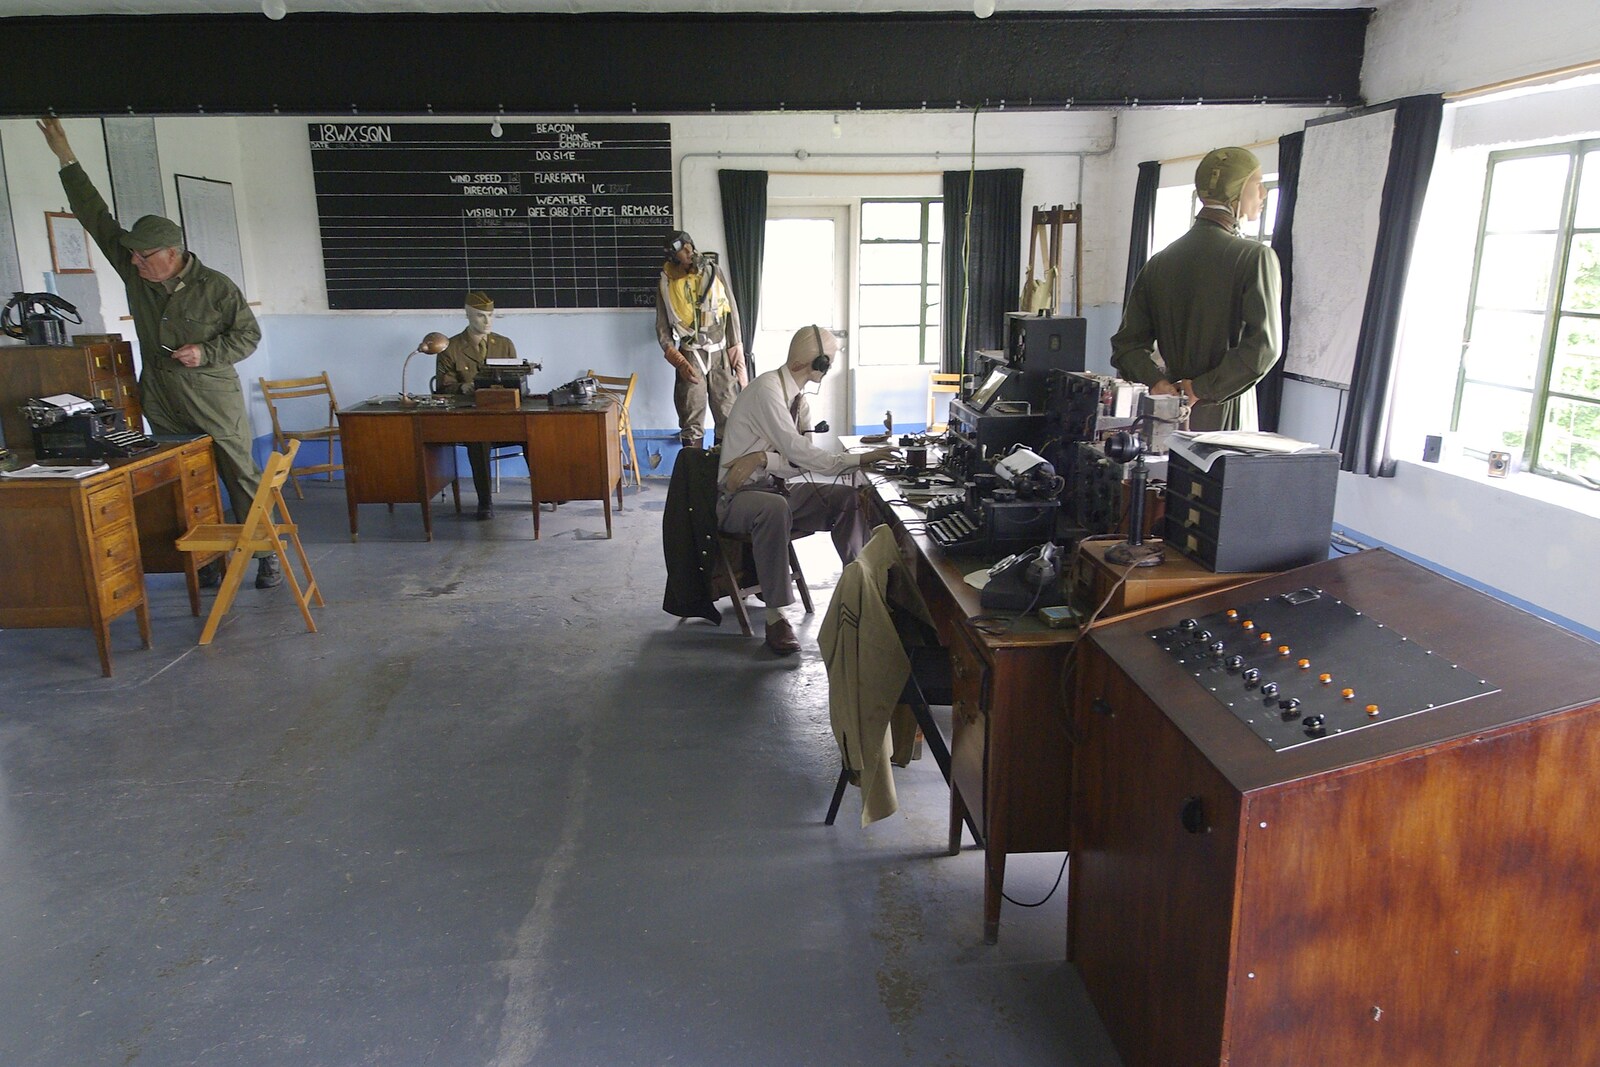 Poking around in the control tower from Debach And the B-17 "Liberty Belle", Suffolk - 12th July 2008